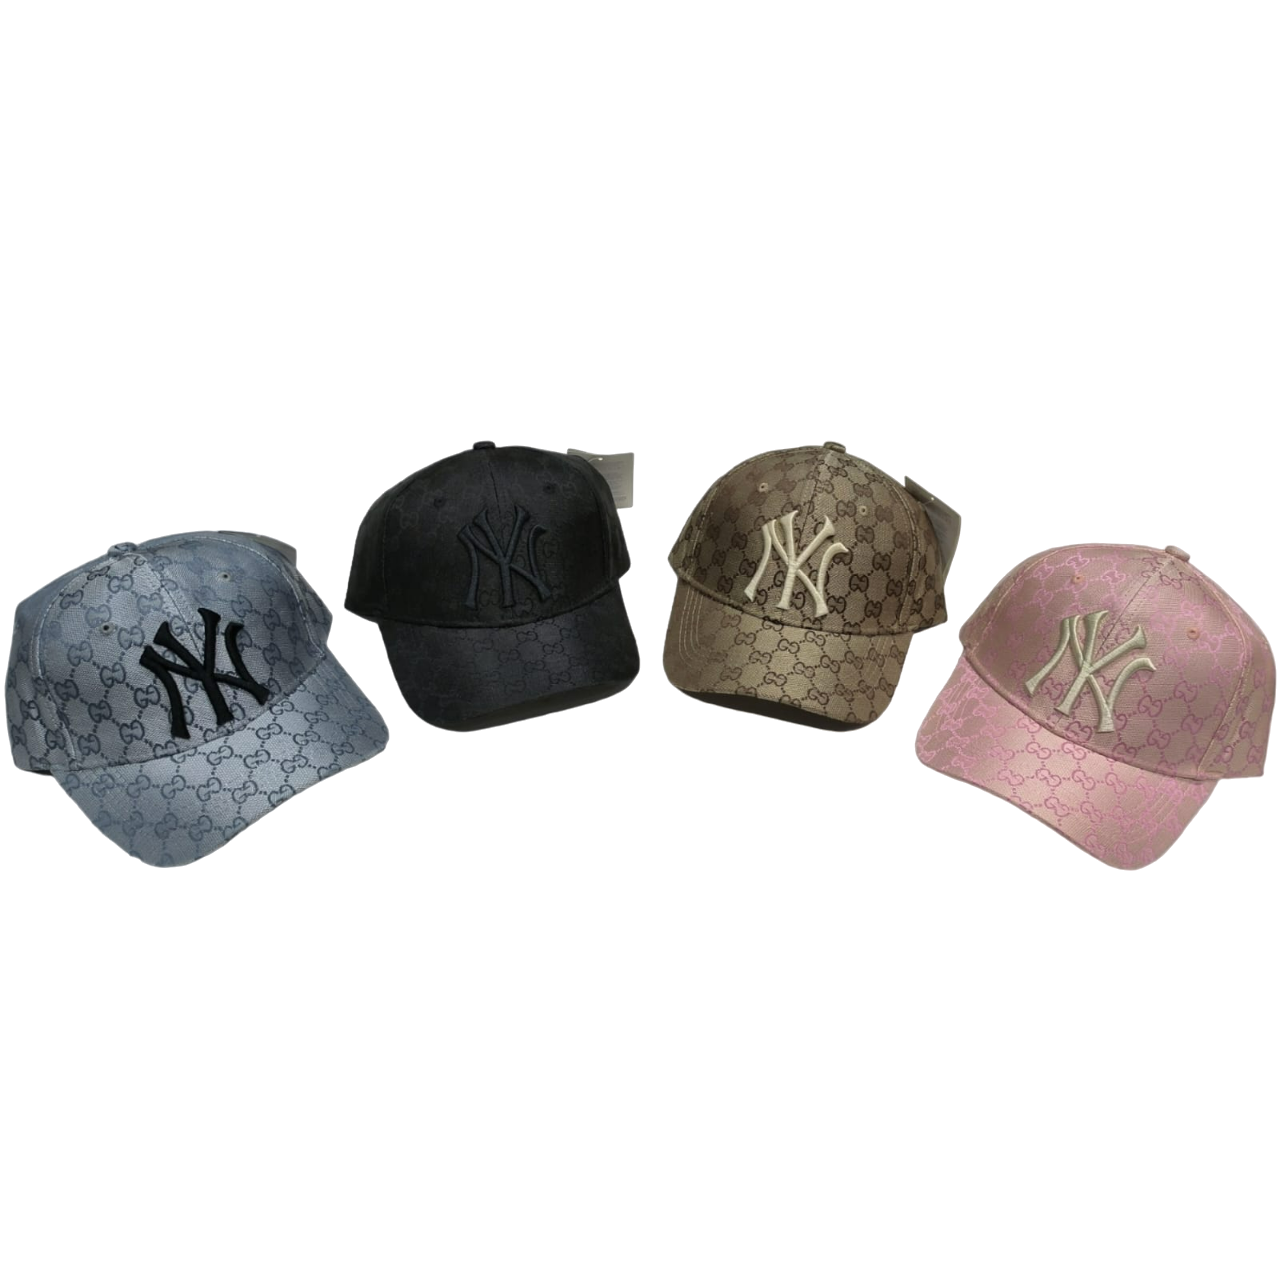 Luxury Collection of Exquisite Unisex Headwear With Adjustable Buckle